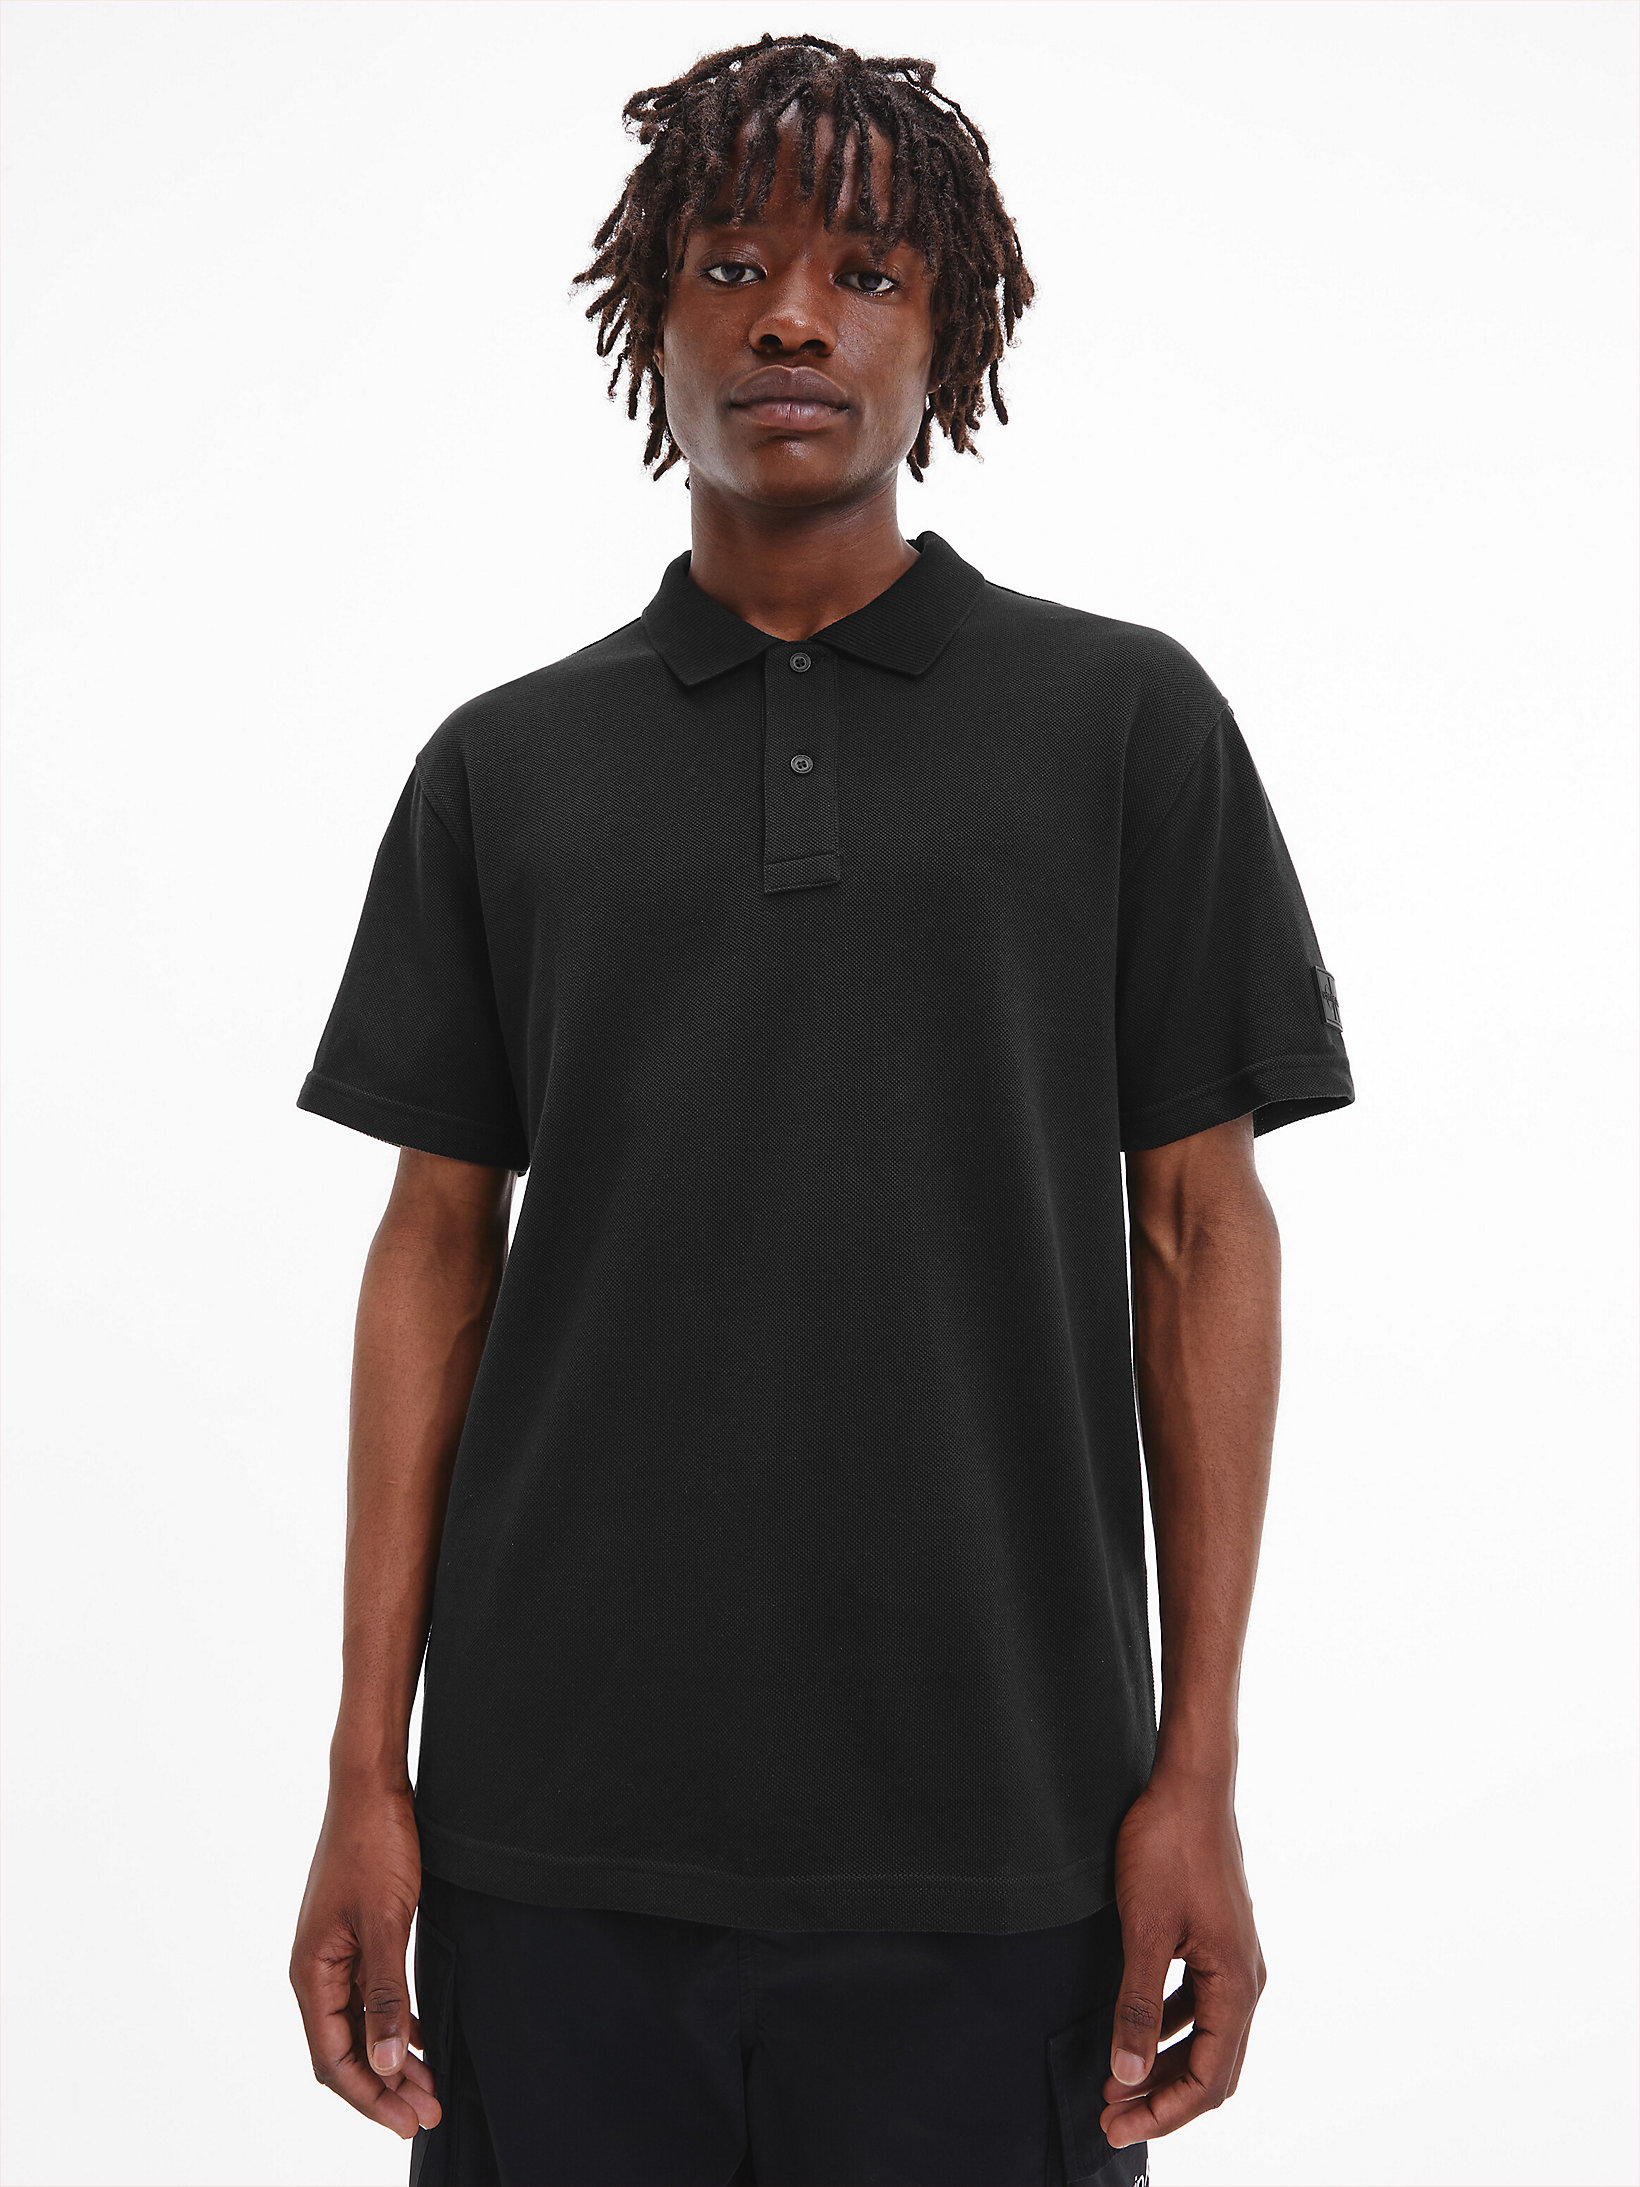 Polo Relaxed > CK Black > undefined hommes > Calvin Klein